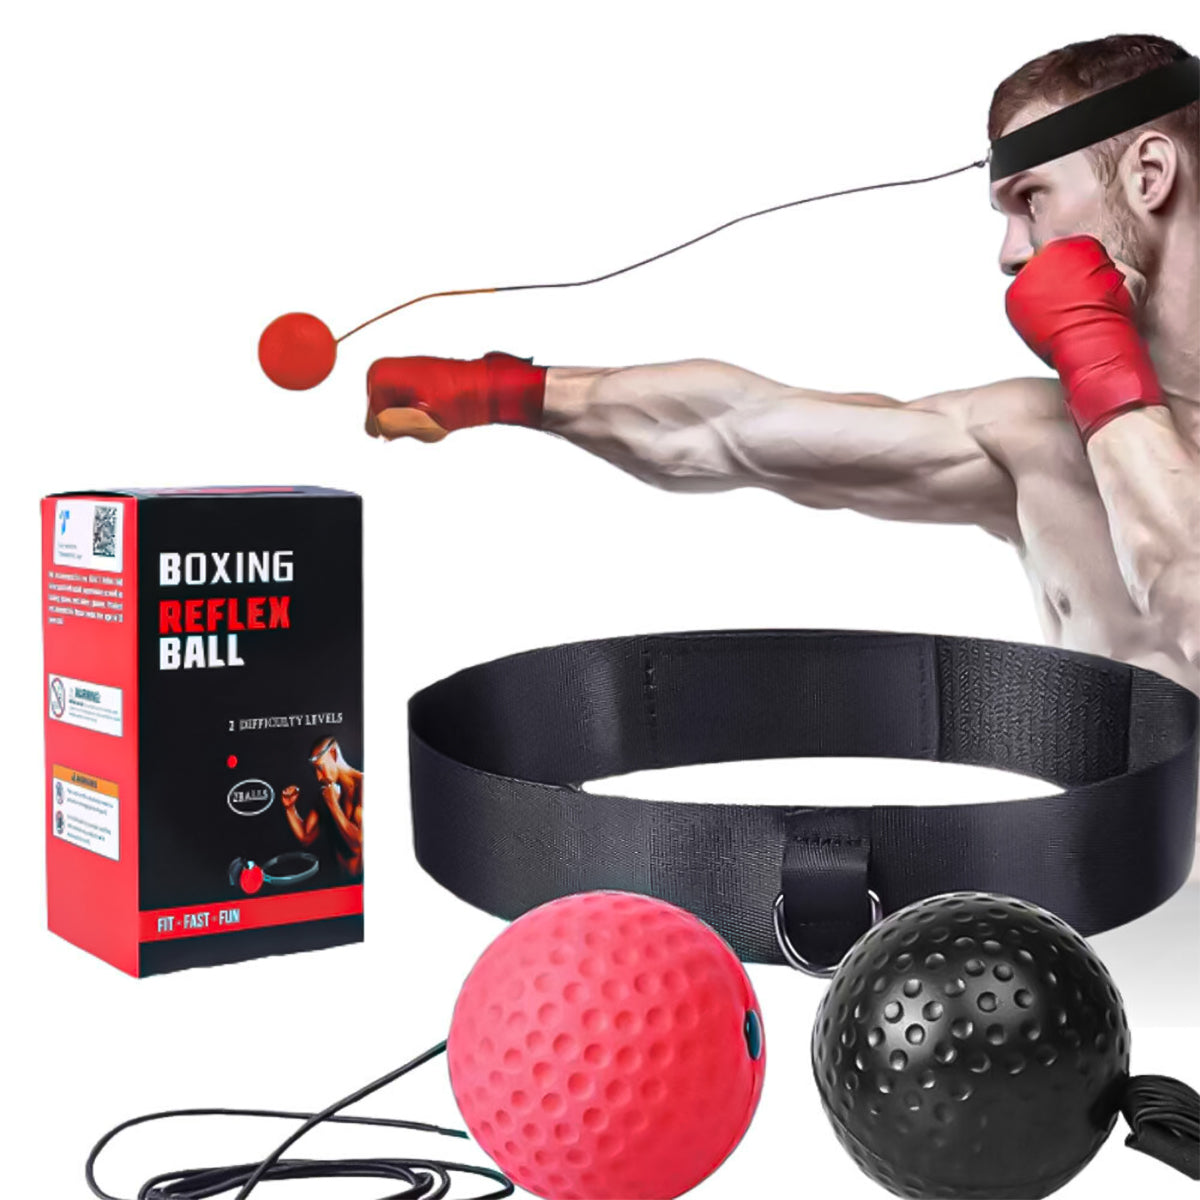 Boxing Reflex Ball - Punch Exercise Head Band Fight Ball